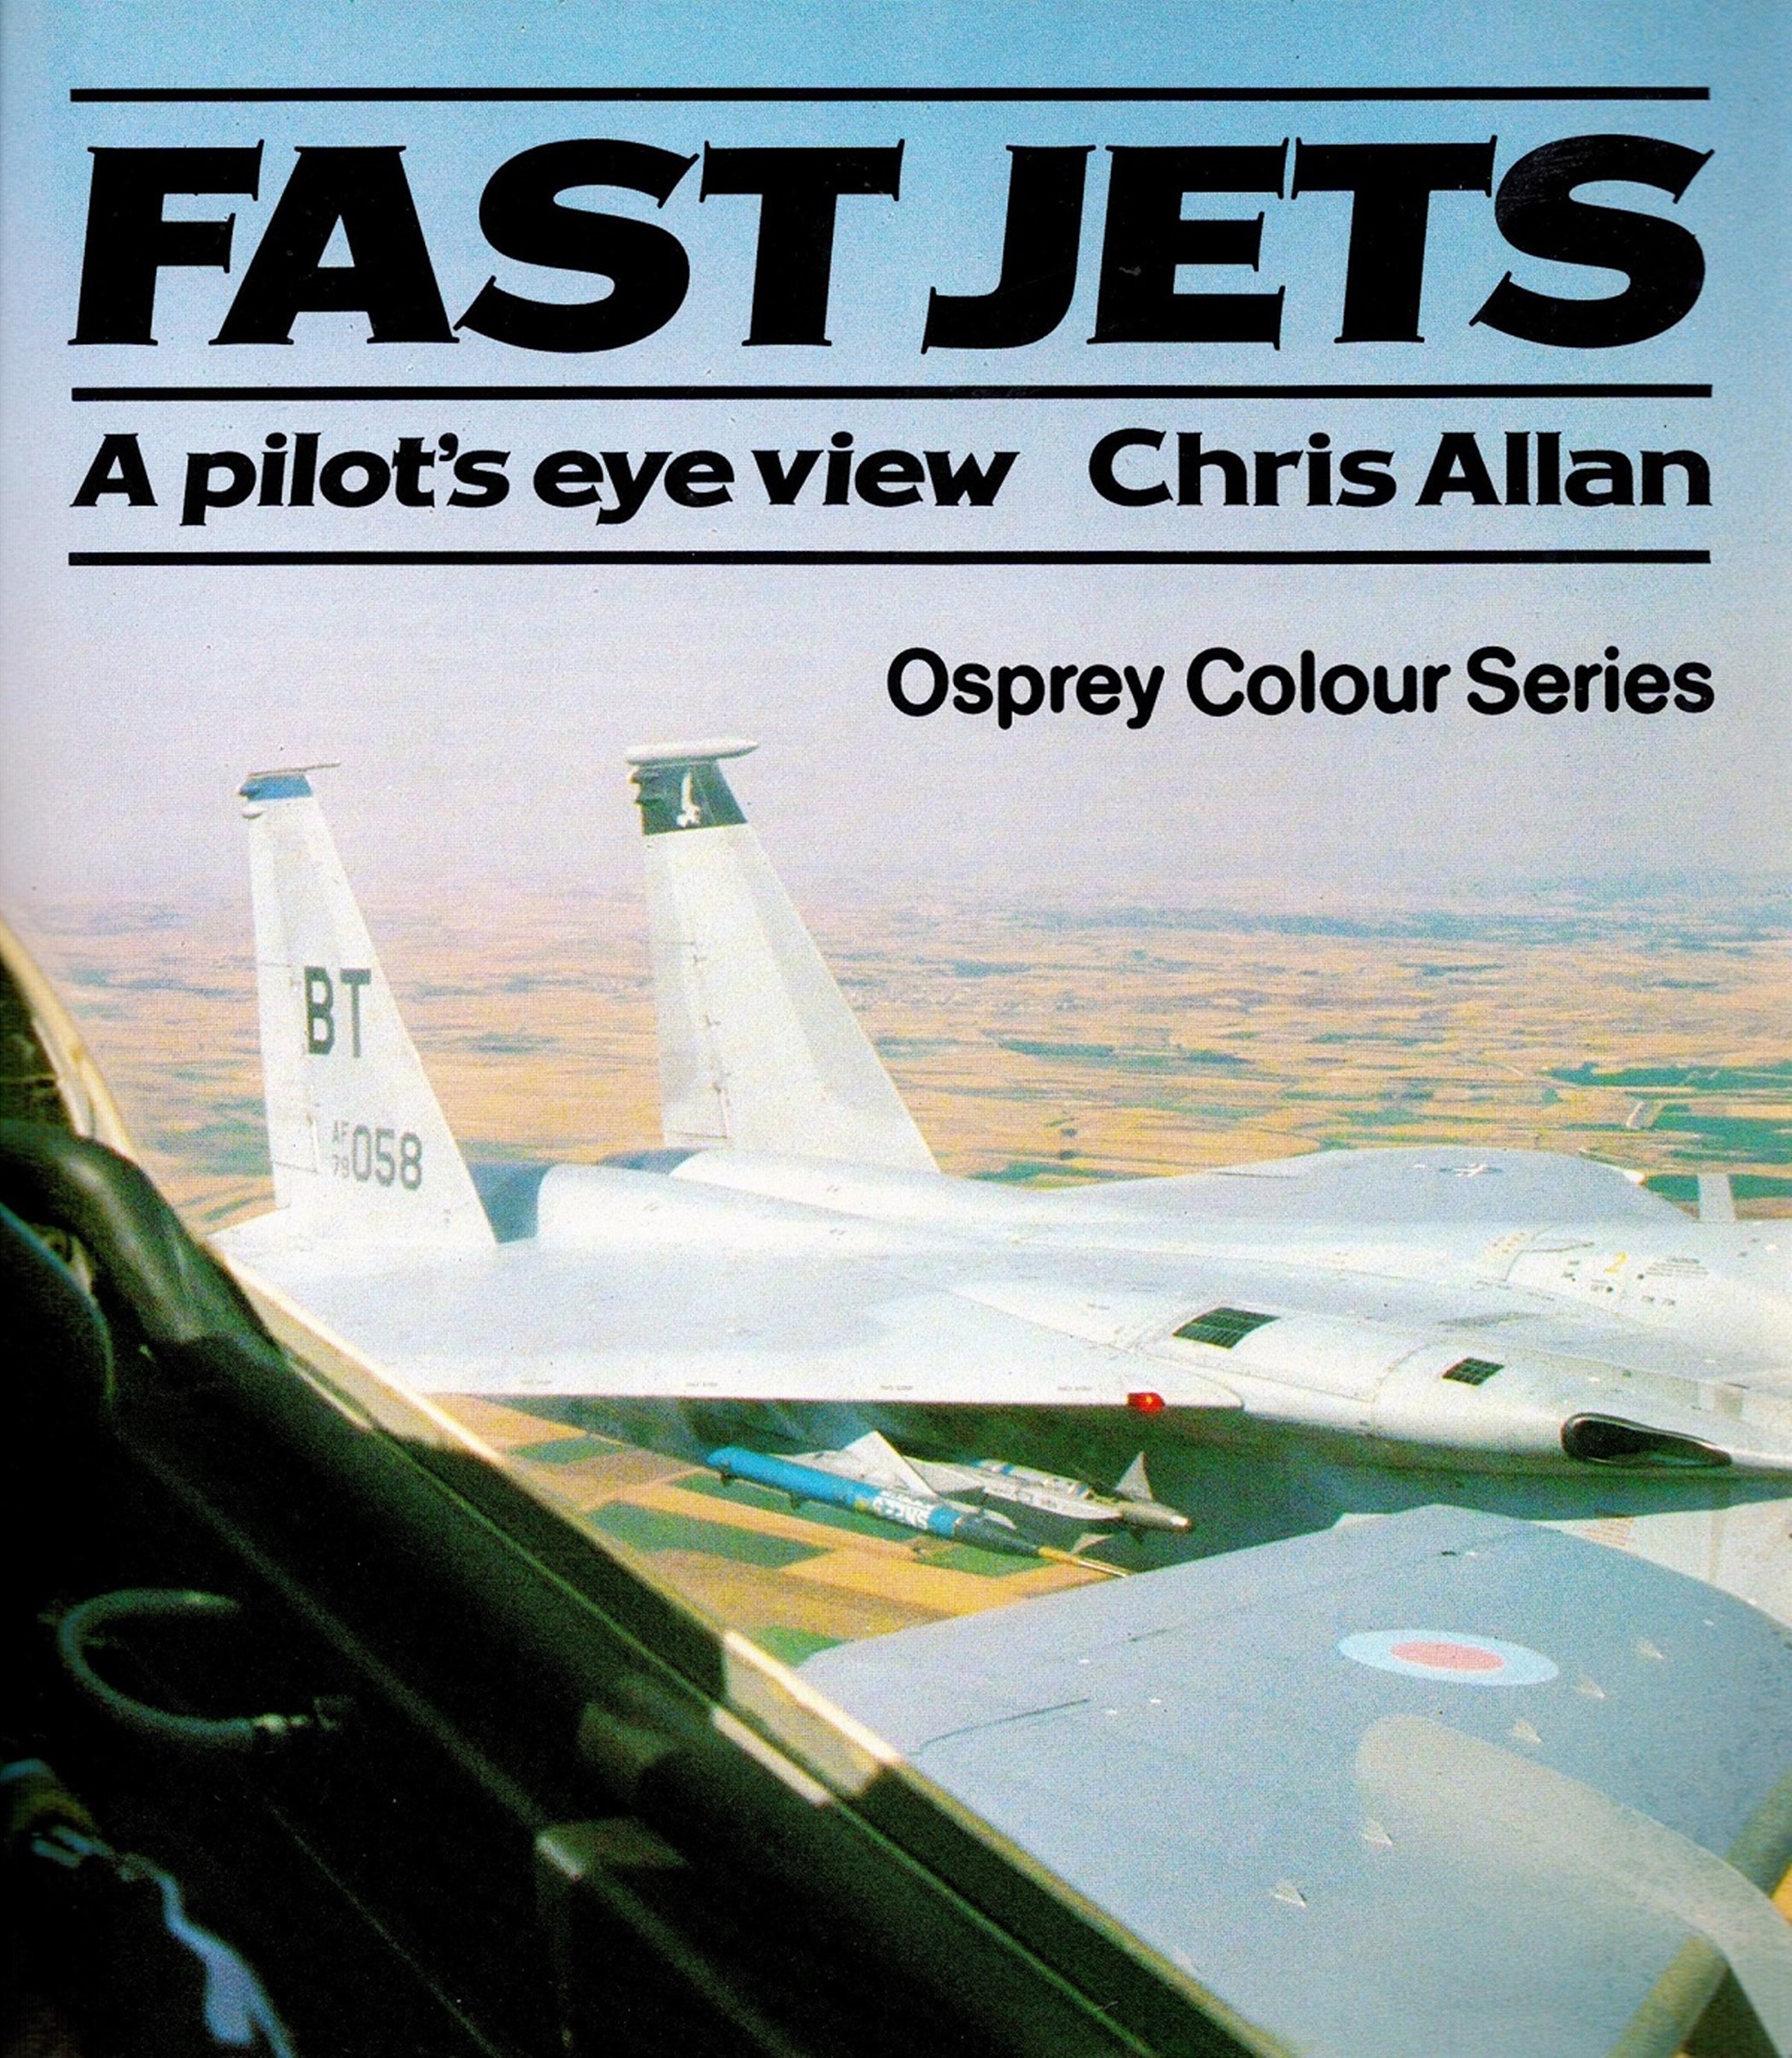 Fast Jets A Pilot's Eye View by Chriss Allan Softback Book 1986 First Edition published by Osprey - Image 2 of 3